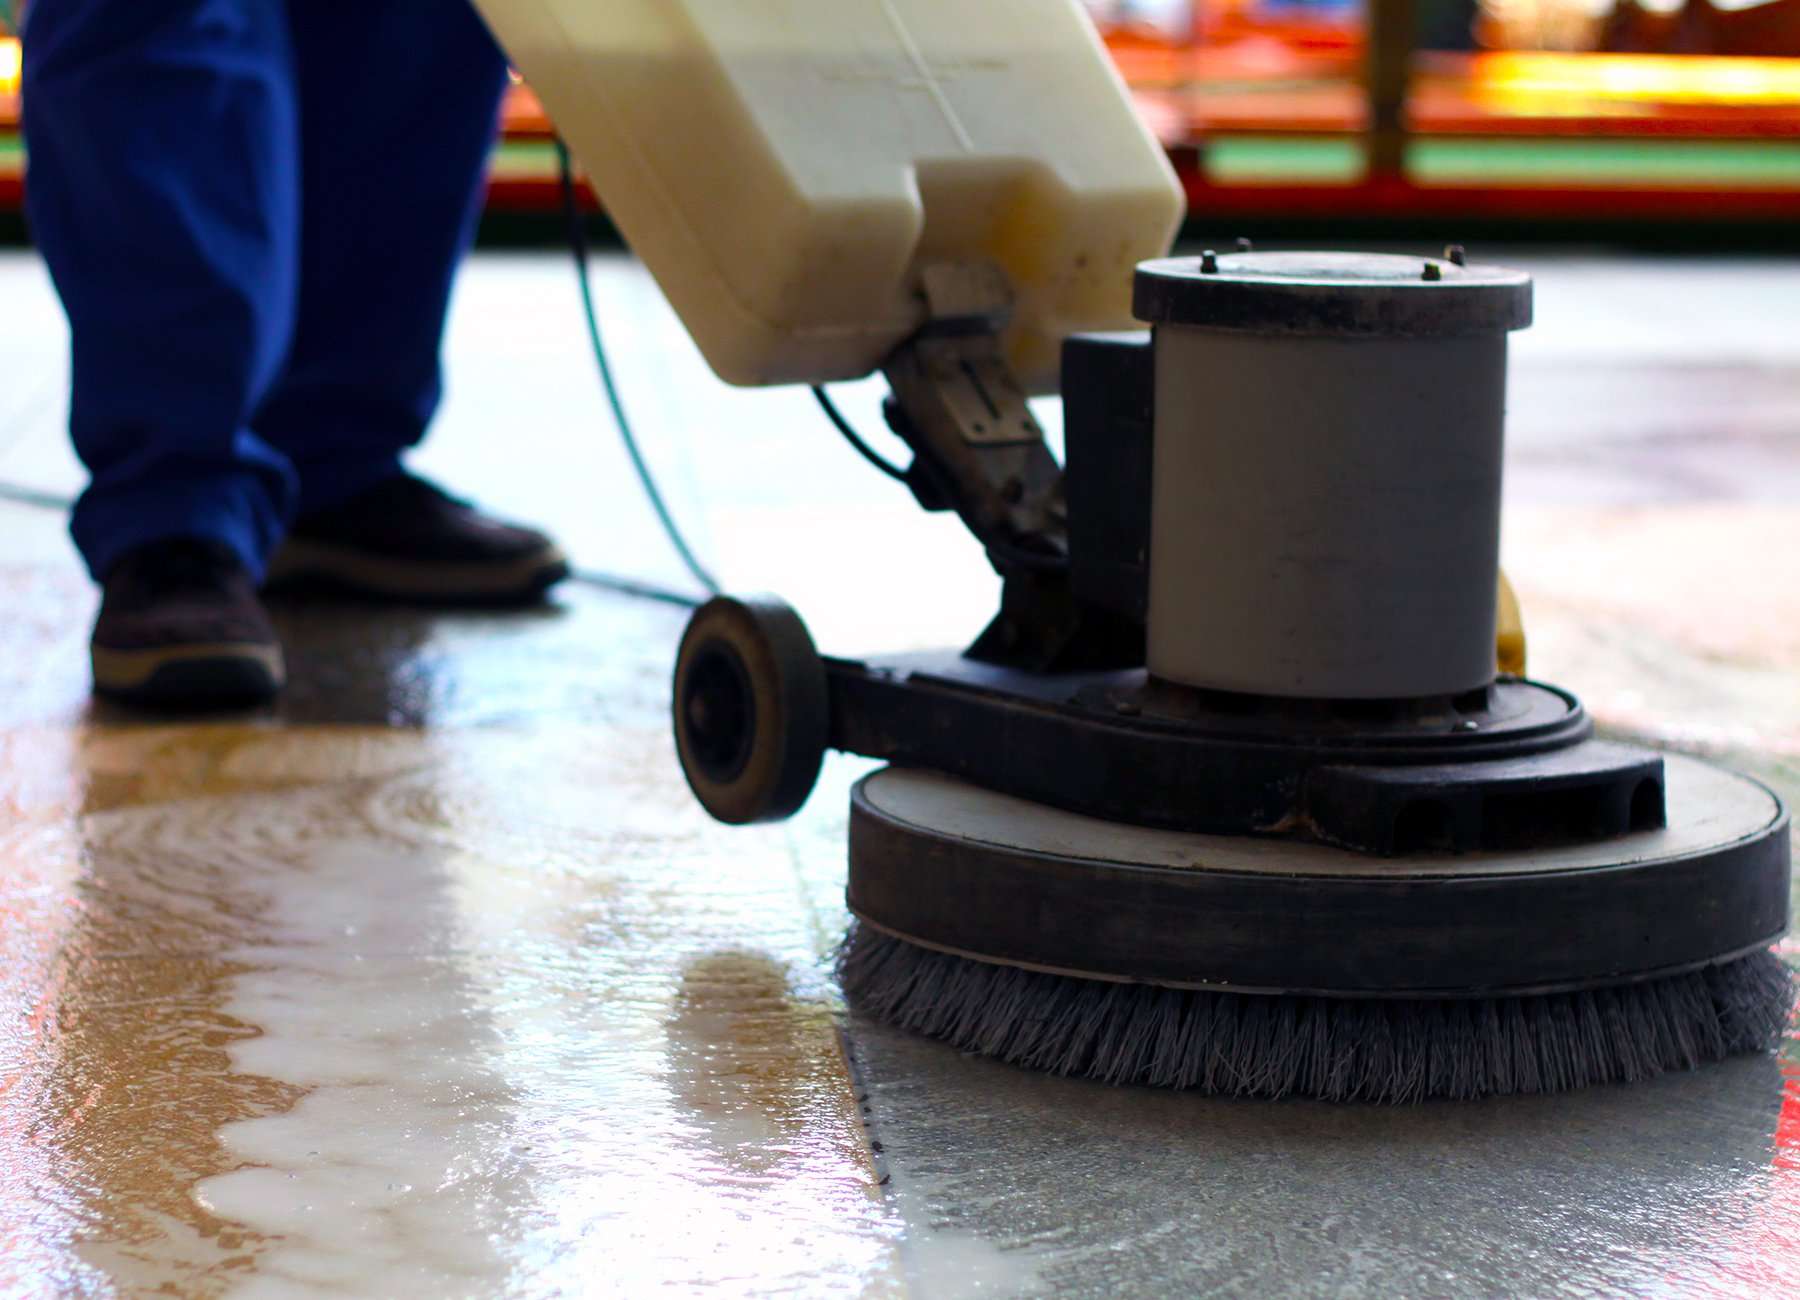 A floor scrubber being used to clean commercial floors